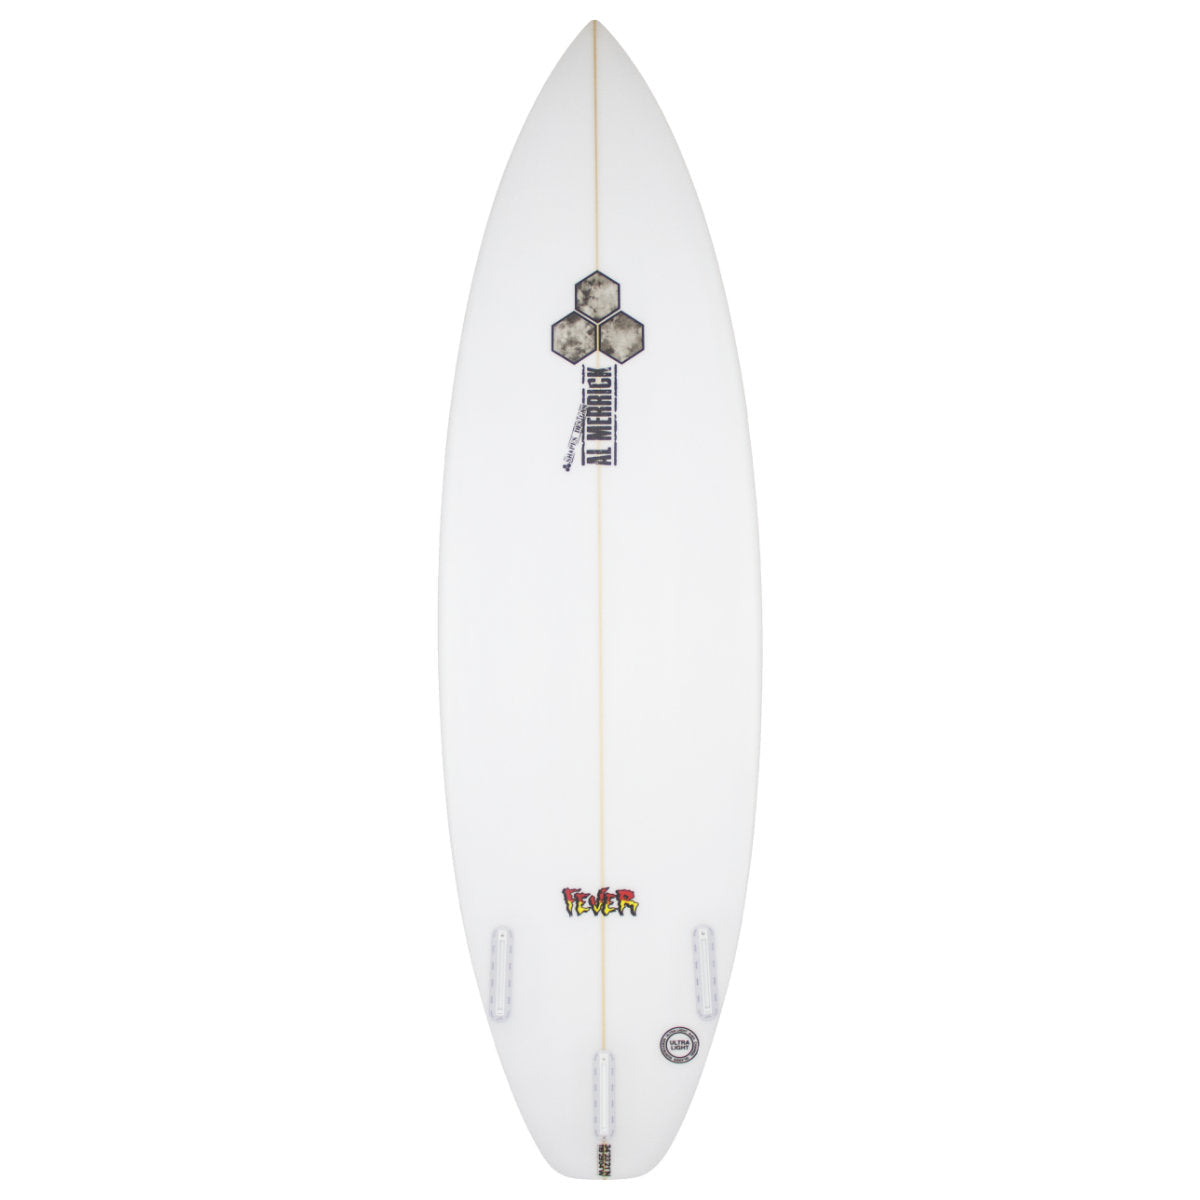 Channel Islands Fever 6'4 PU Future 3 fin – Surf Ontario